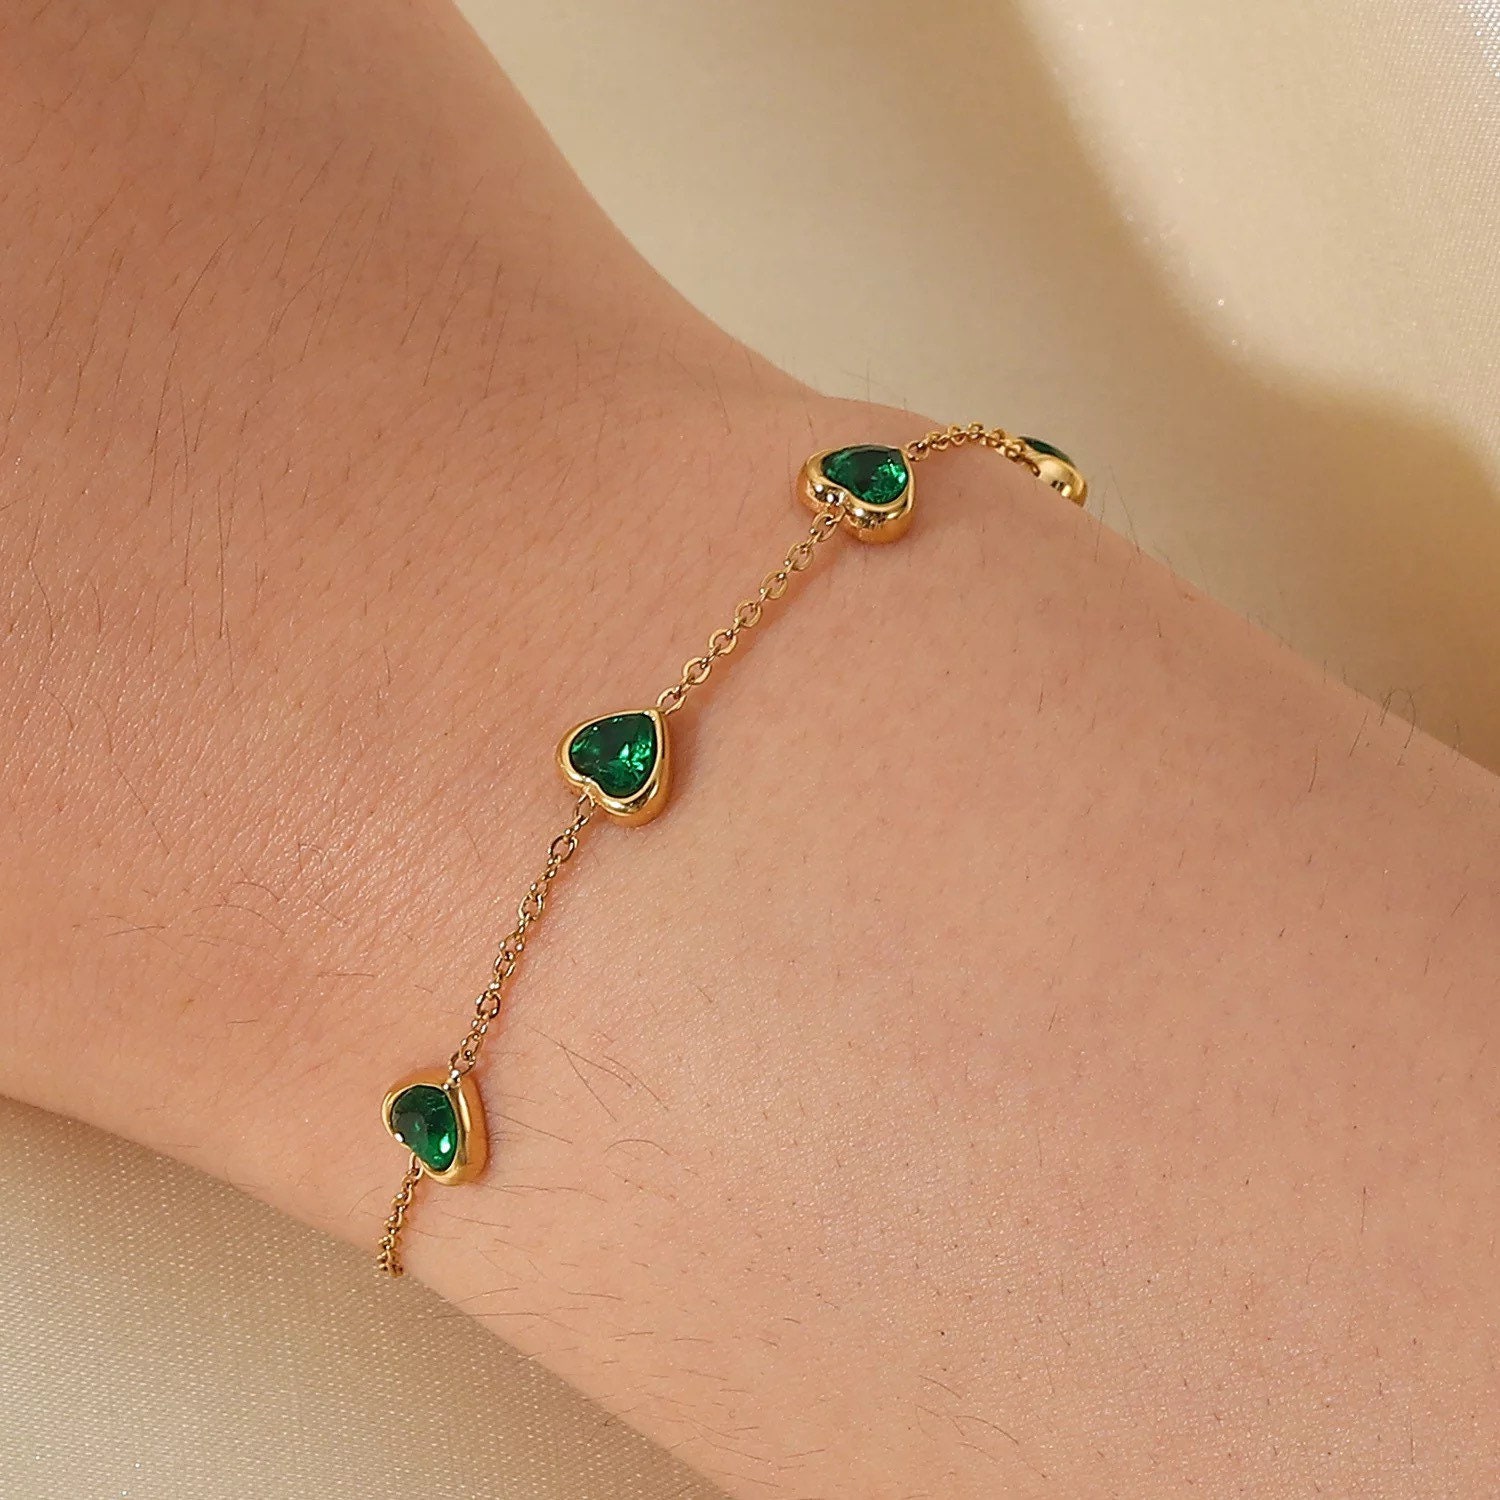 White Blossoms Bracelet Cubic Zirconia Dainty Charms Gold -   Blossom  bracelet, Emerald green earrings, 925 sterling silver chain